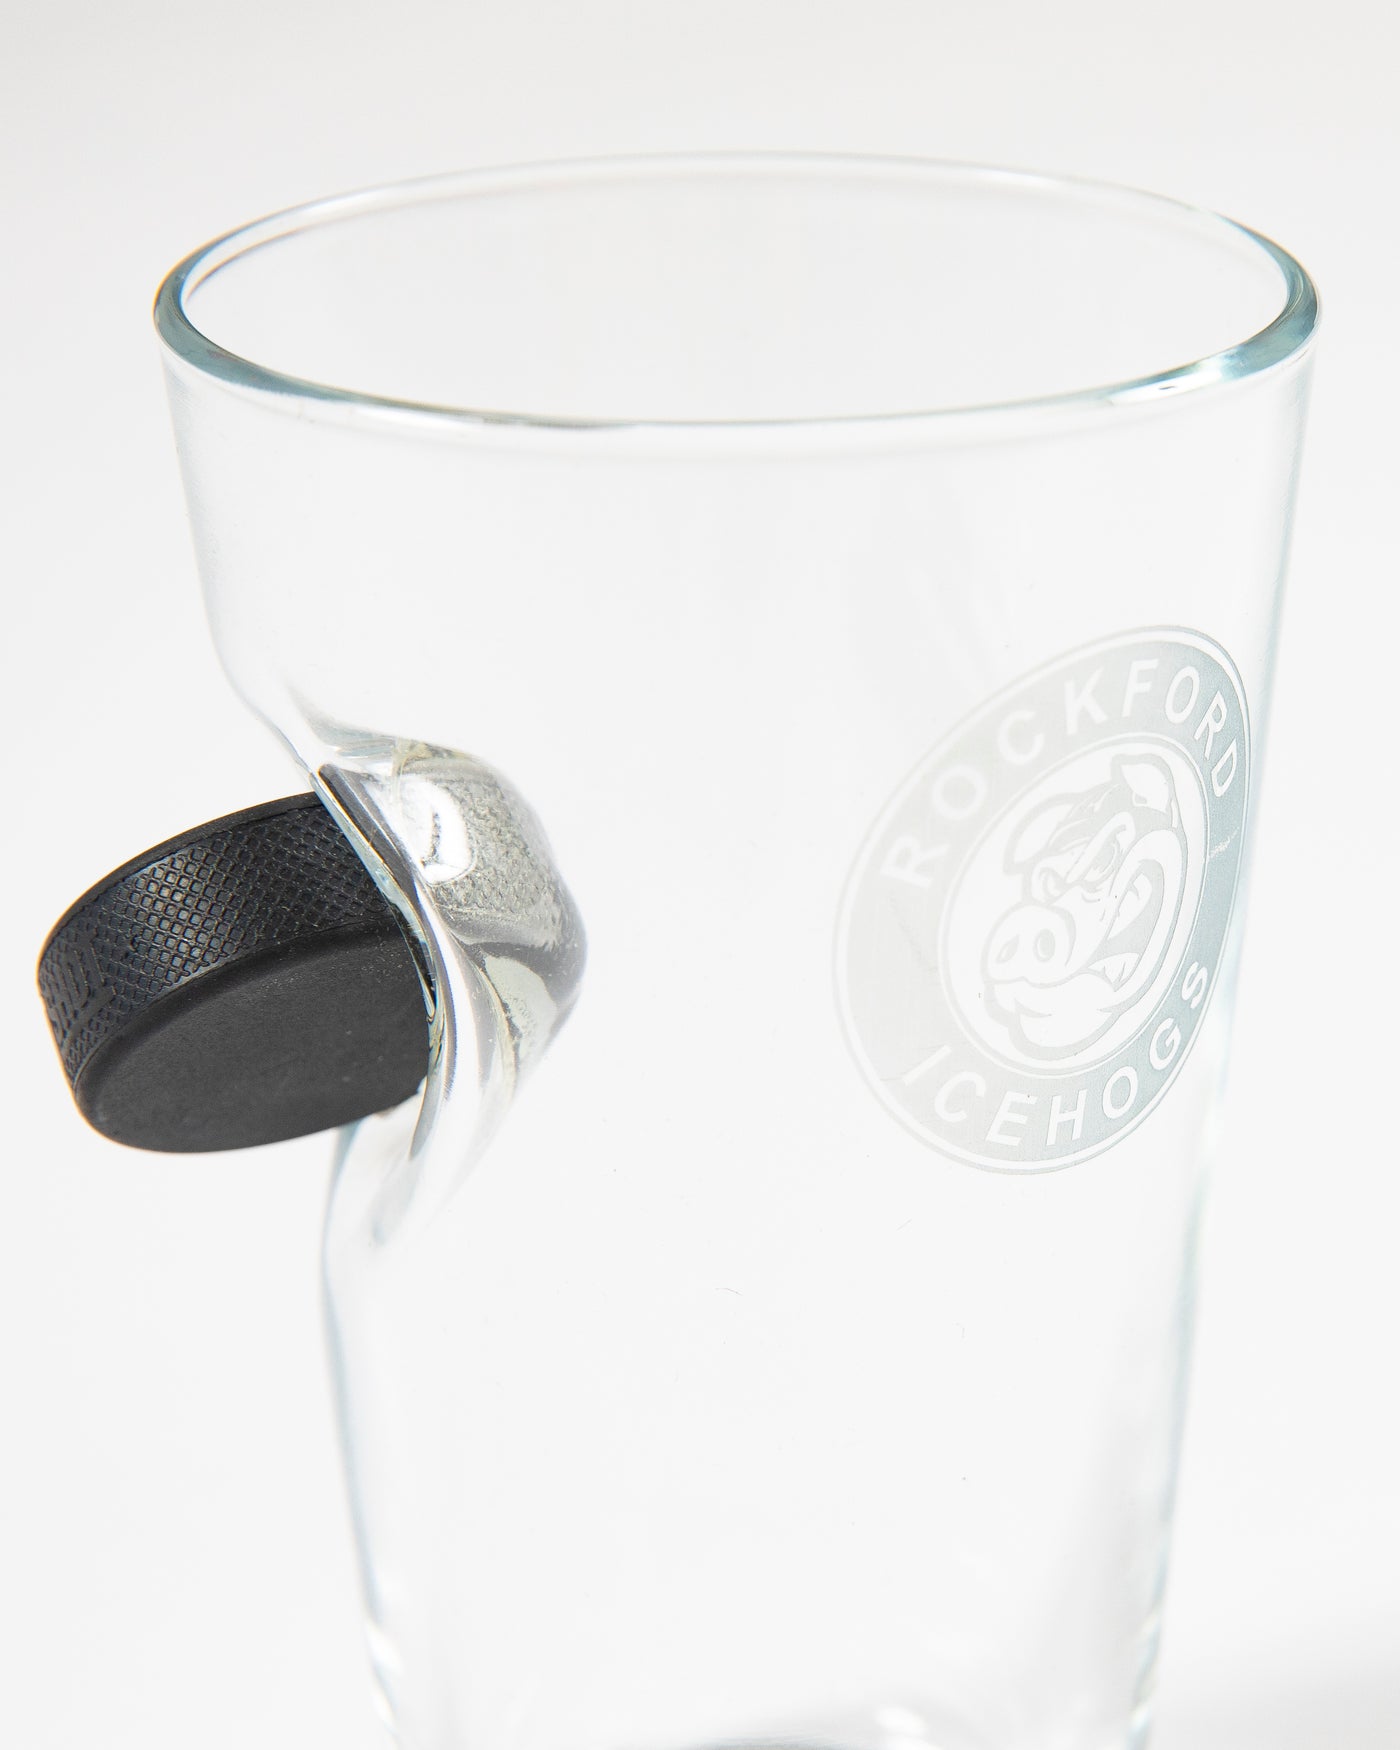 Rockford IceHogs pint glass with puck on side - detail lay flat